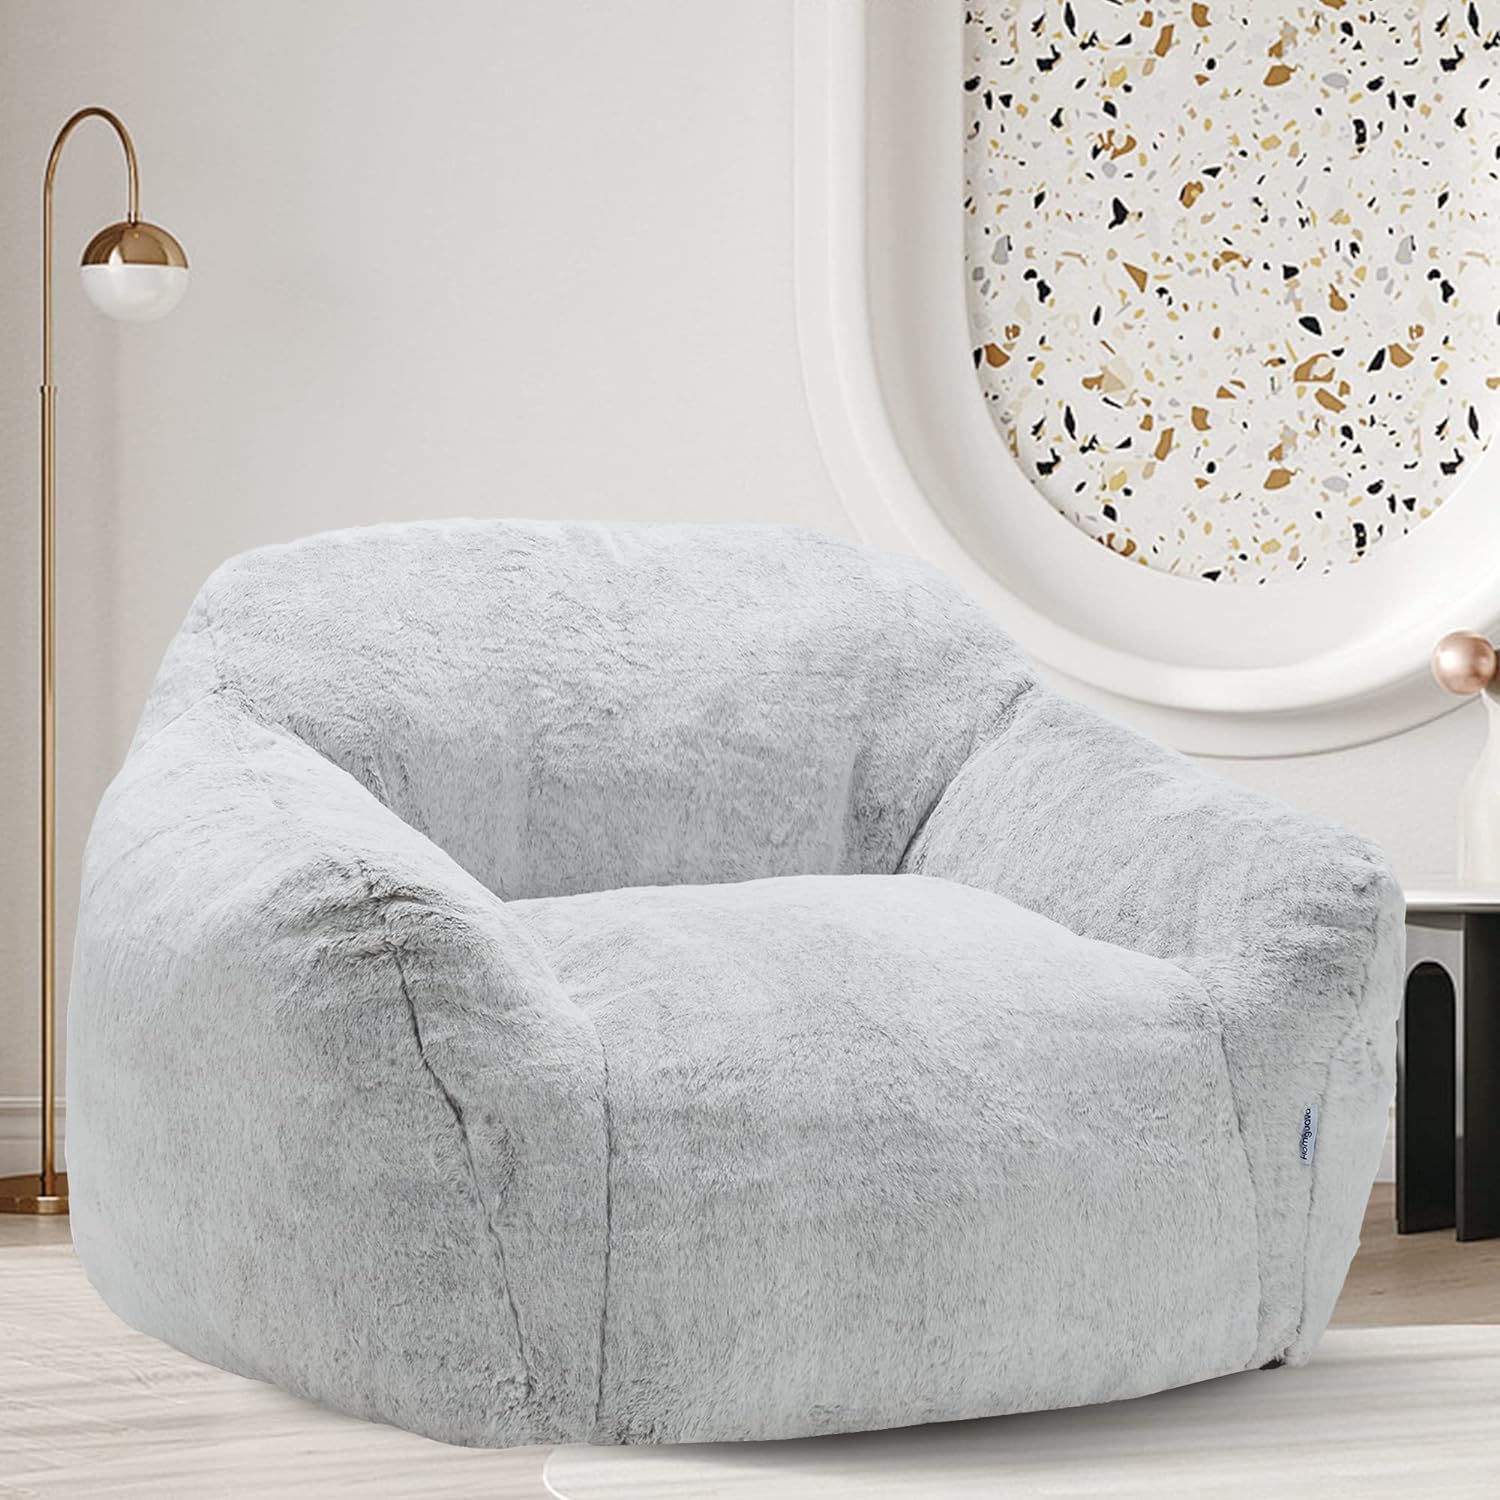 Homguava Giant Bean Bag Chair,Bean Bag Sofa Chair with Armrests, Bean Bag Couch Stuffed High-Density Foam, Plush Lazy Sofa Comfy Chair,Large BeanBag Chair for Adults in Livingroom,Bedroom (Light Grey)